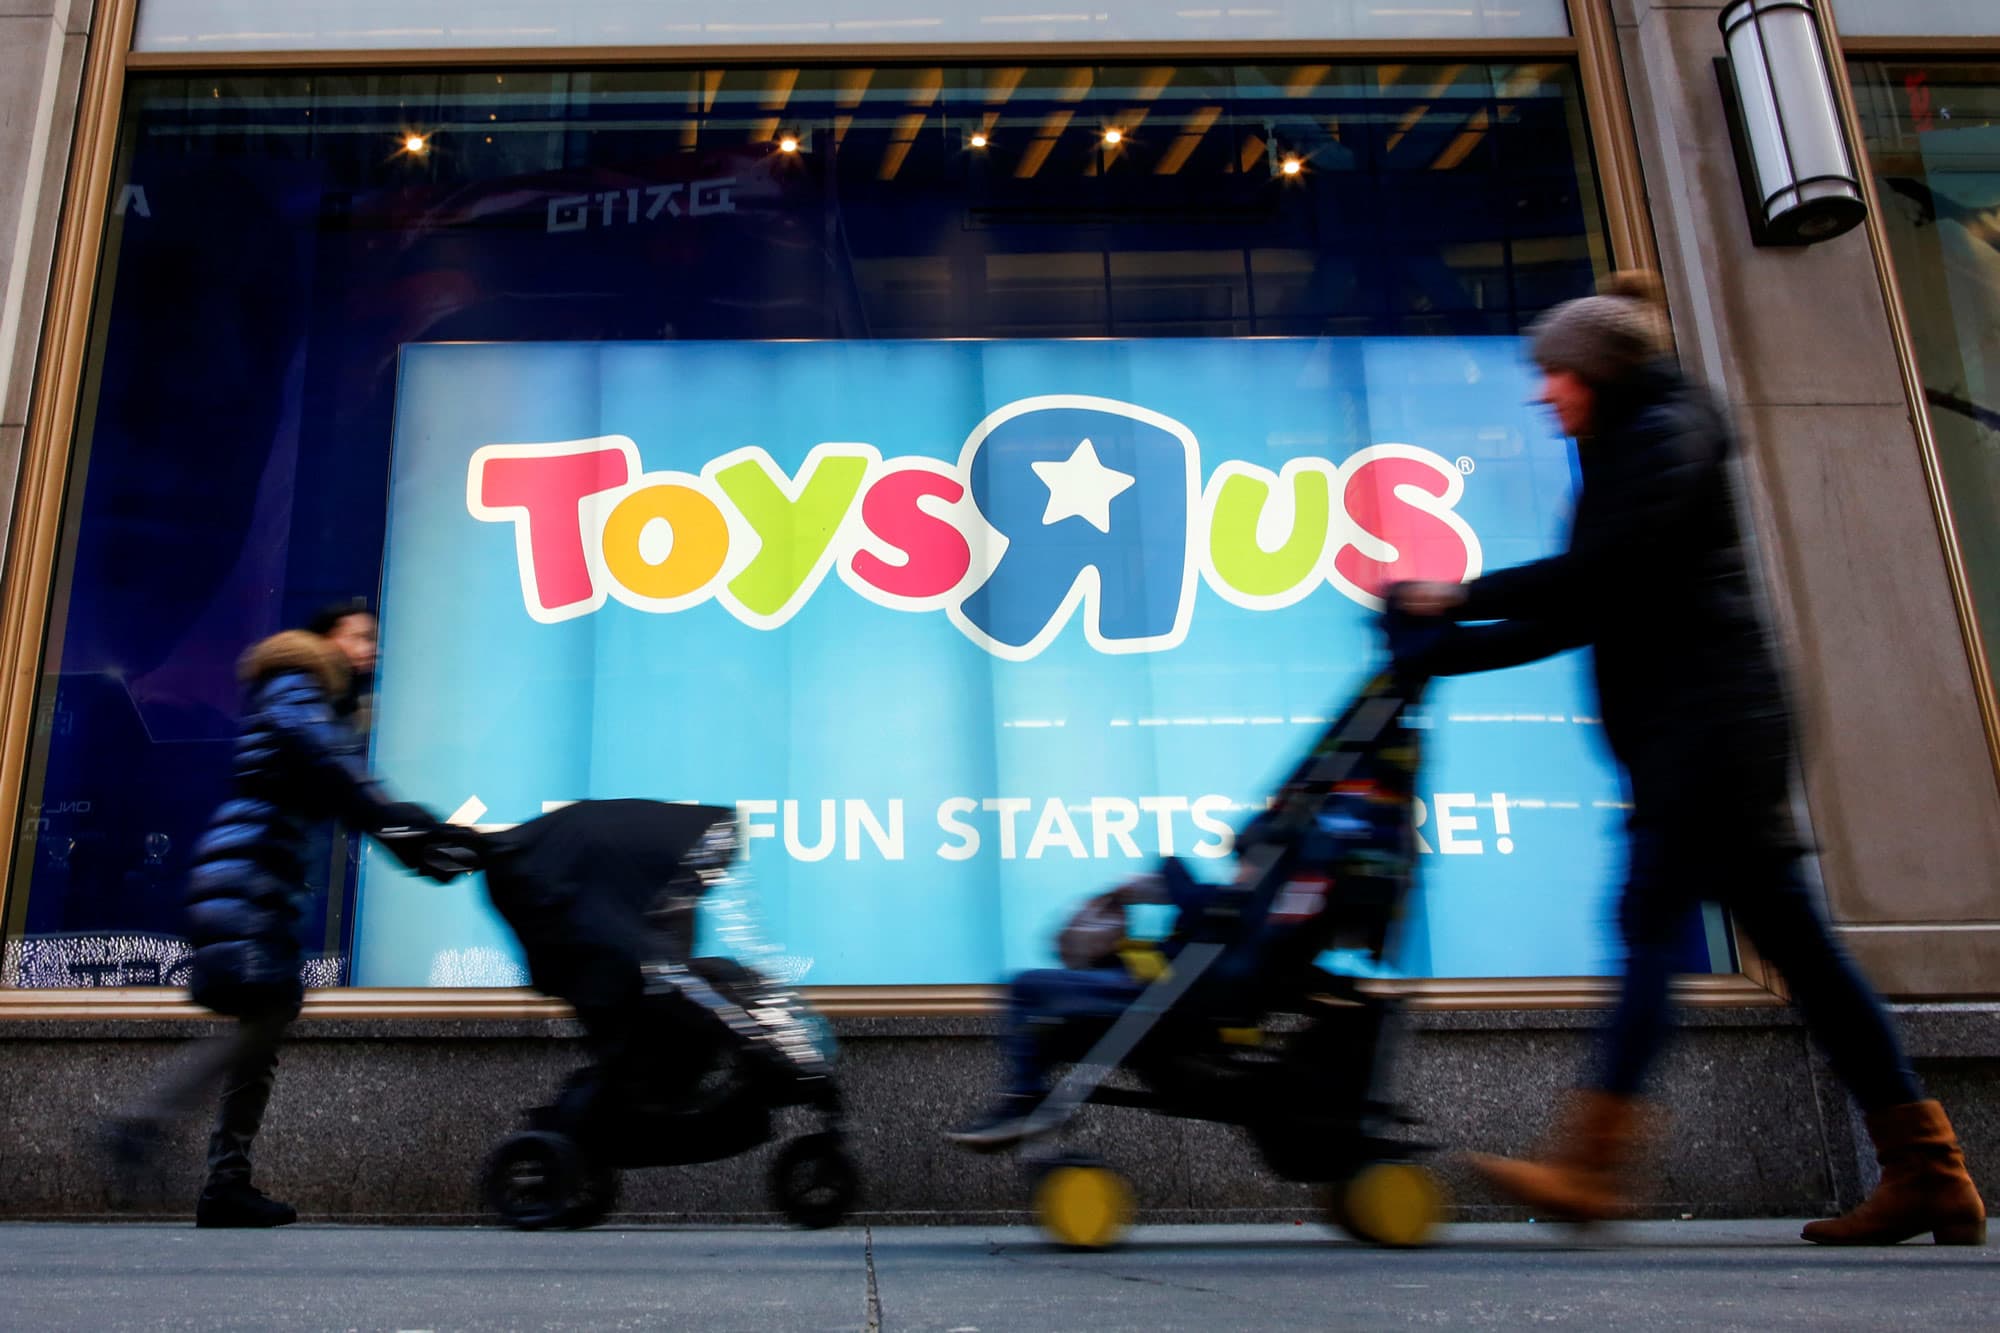 WHP Global takes the controlling interest in Toys R Us, plans to open stores